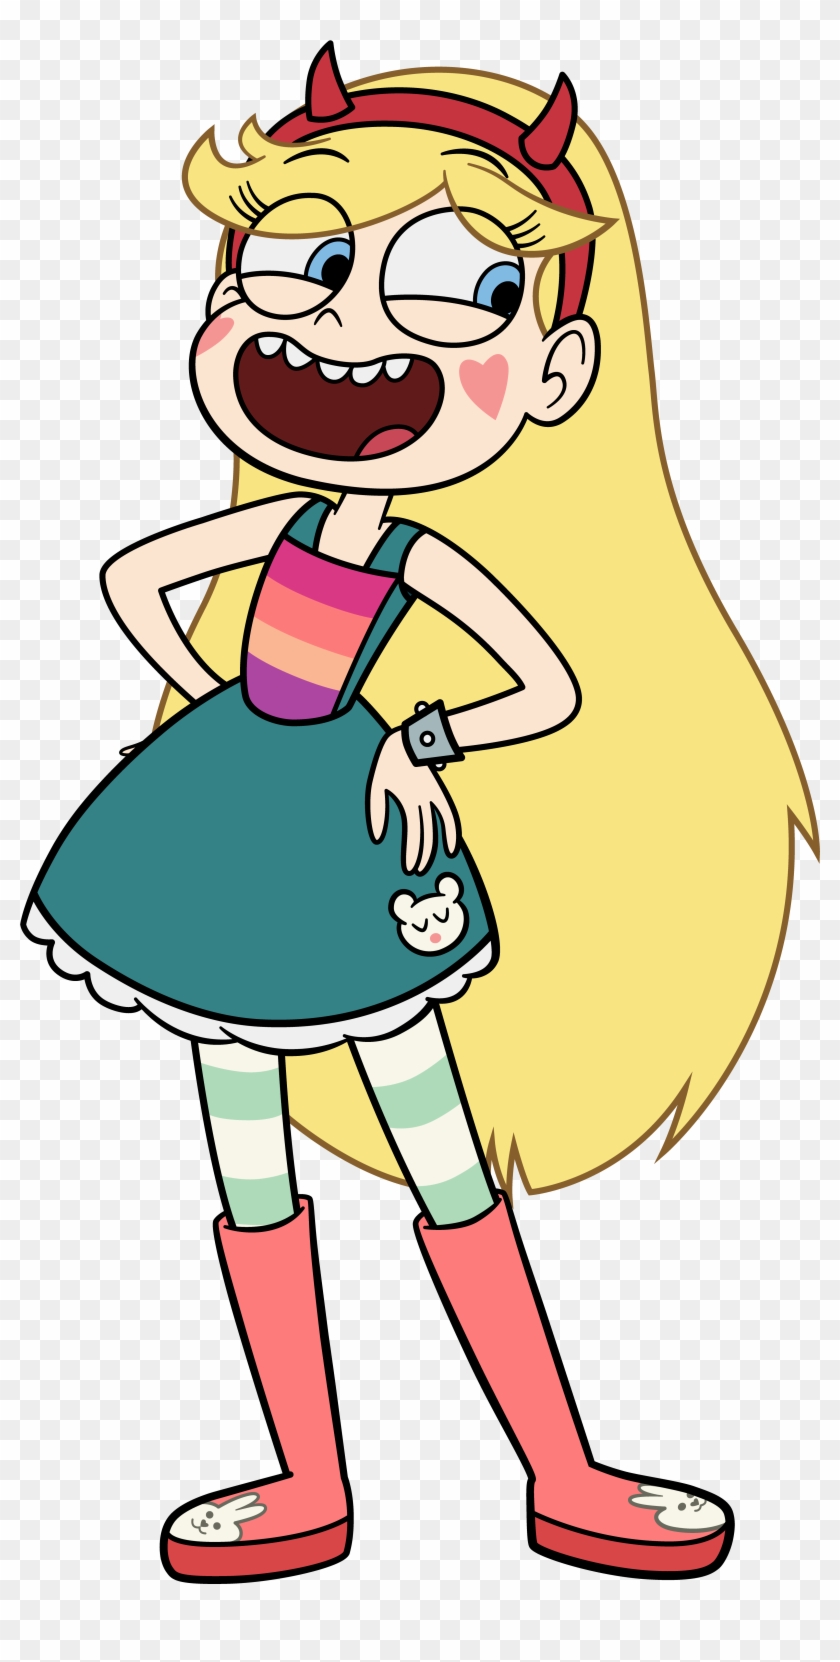 Star From Star Vs - Star Vs The Forces Of Evil Star Butterfly Clipart #6004755